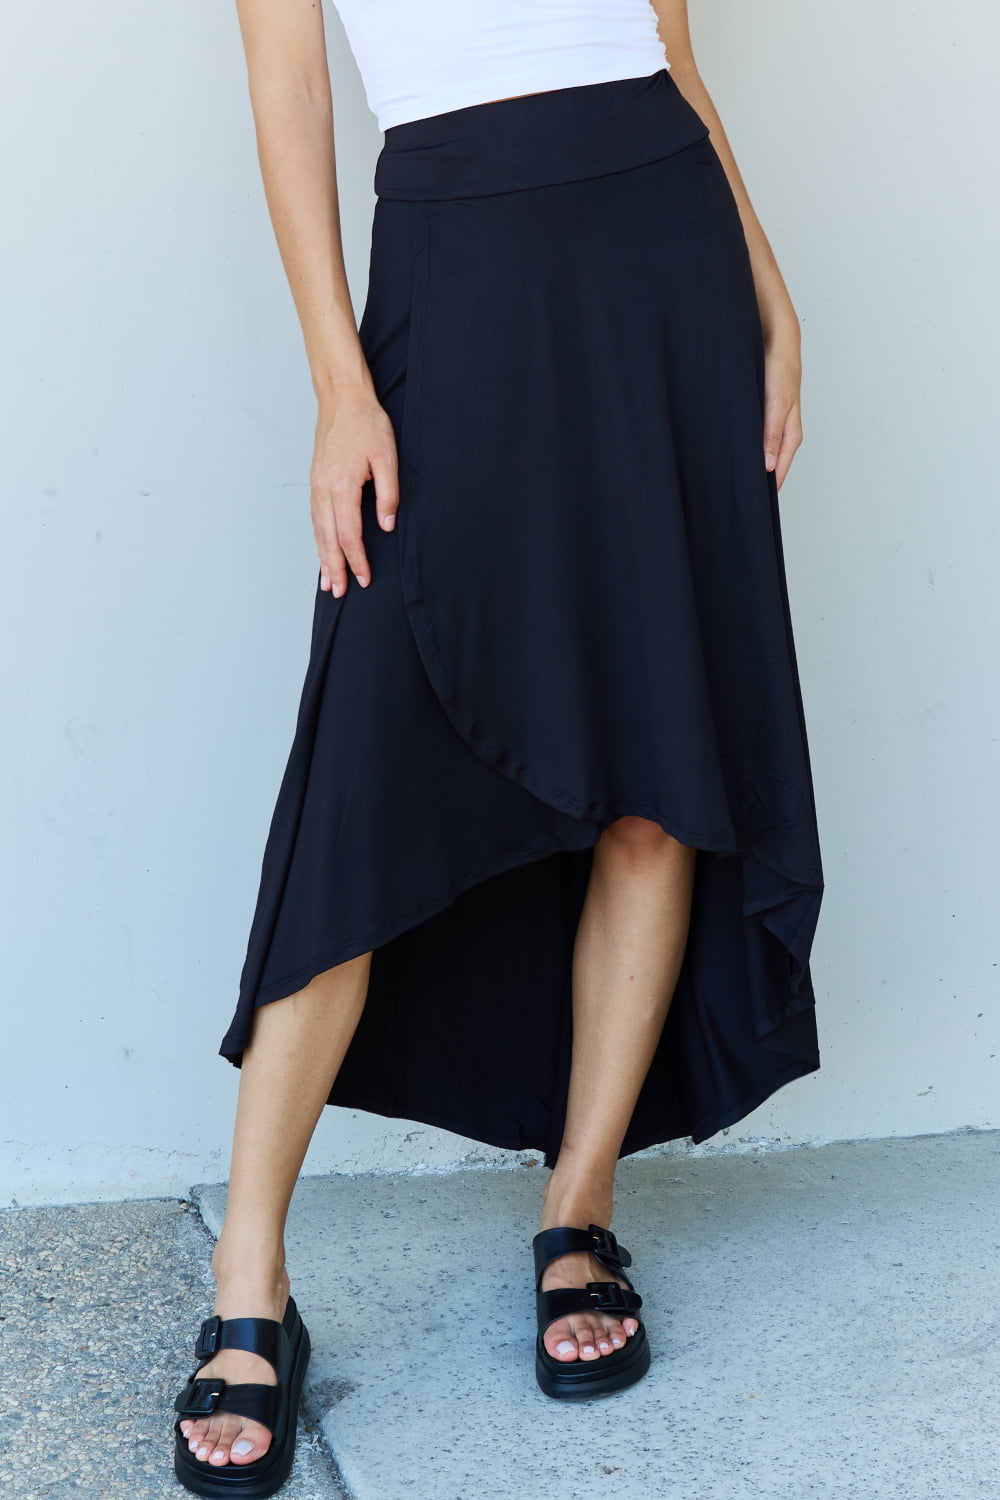 Ninexis First Choice High Waisted Flare Maxi Skirt in Black Ti Amo I love you